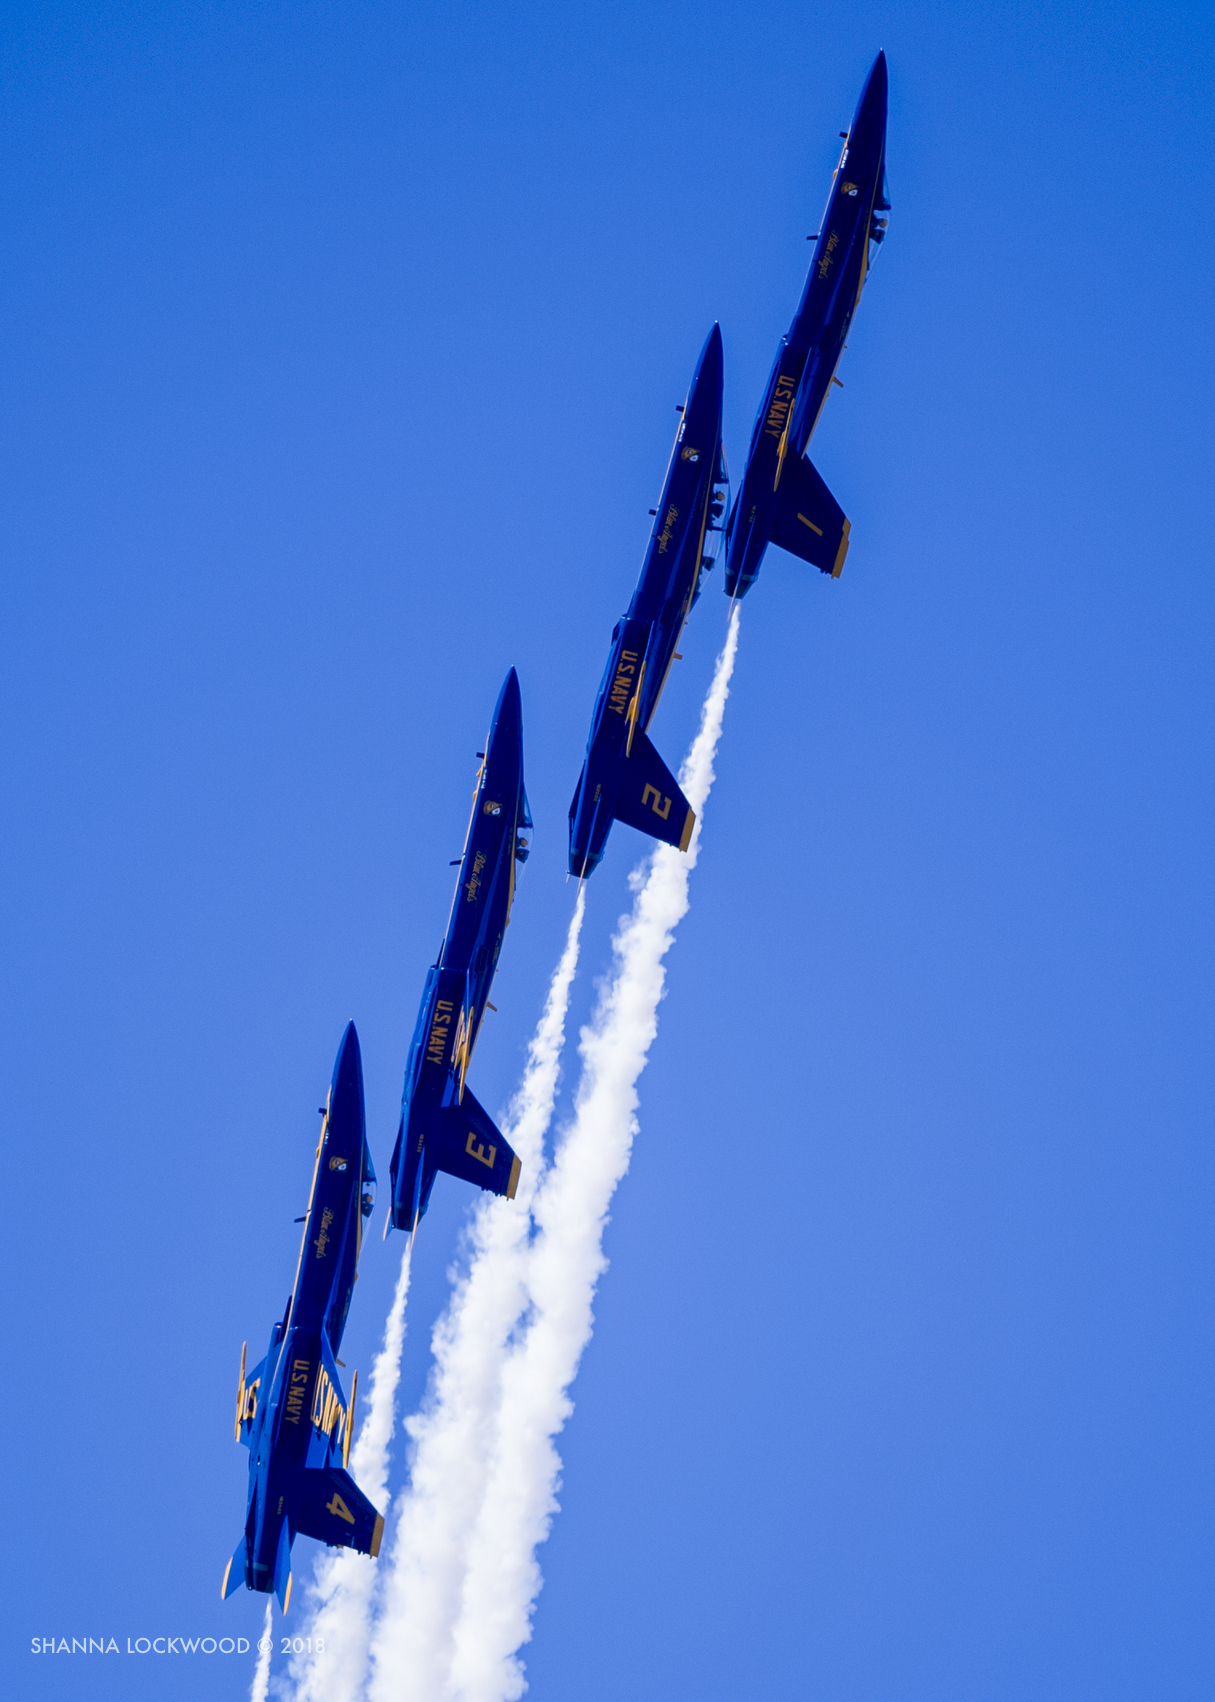  Apr 28, 2018; Blue Angels fly during the 2018 Myrtle Beach Air Show in Myrtle Beach, South Carolina. Mandatory Credit: Shanna Lockwood 